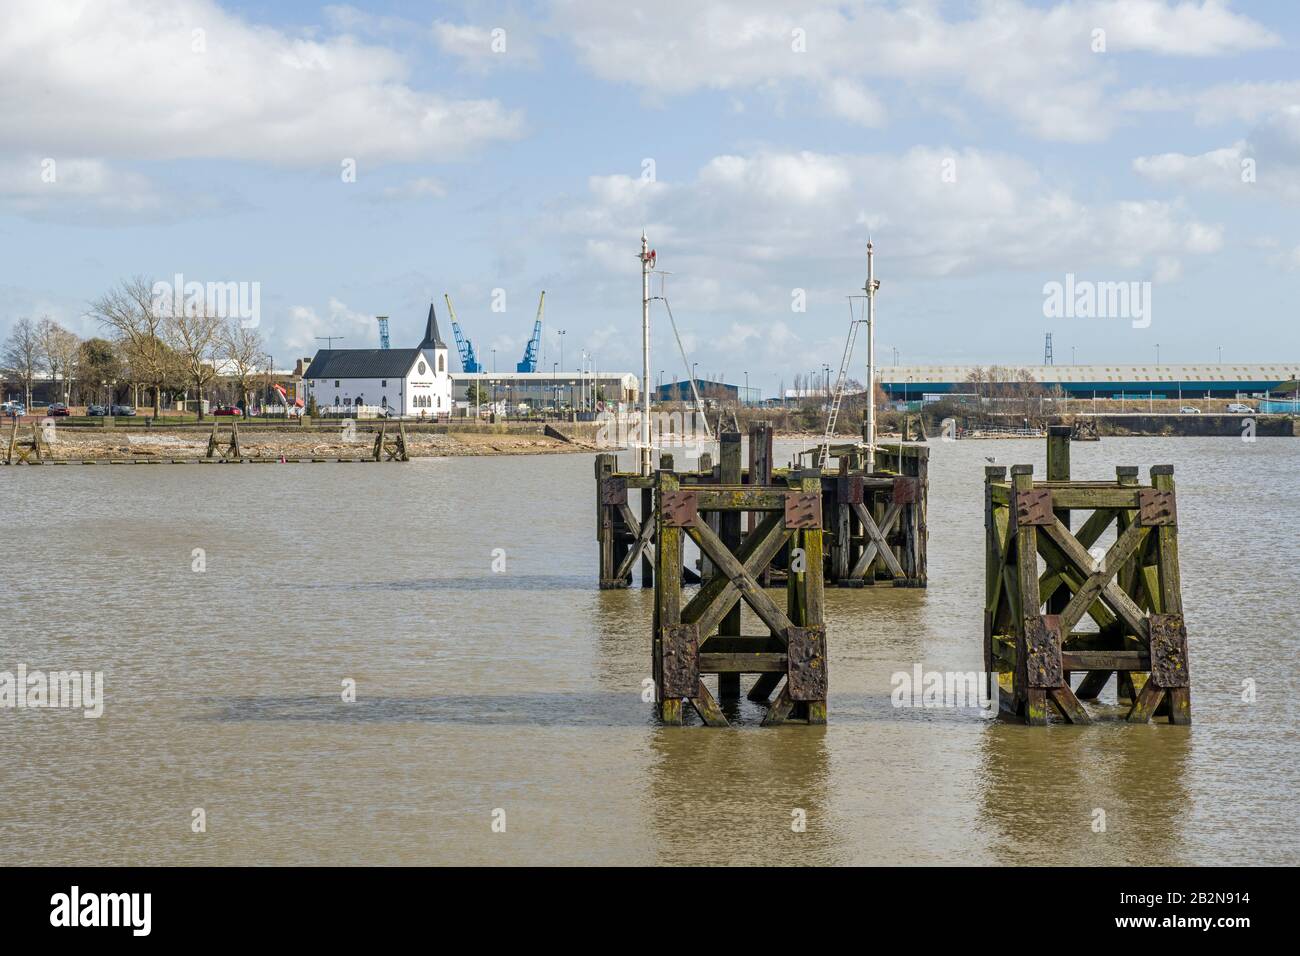 Wooden structures in the Bay known as Dolphins, used to moor ships to when carrying out repair work. They have been left here as a reminder. Stock Photo